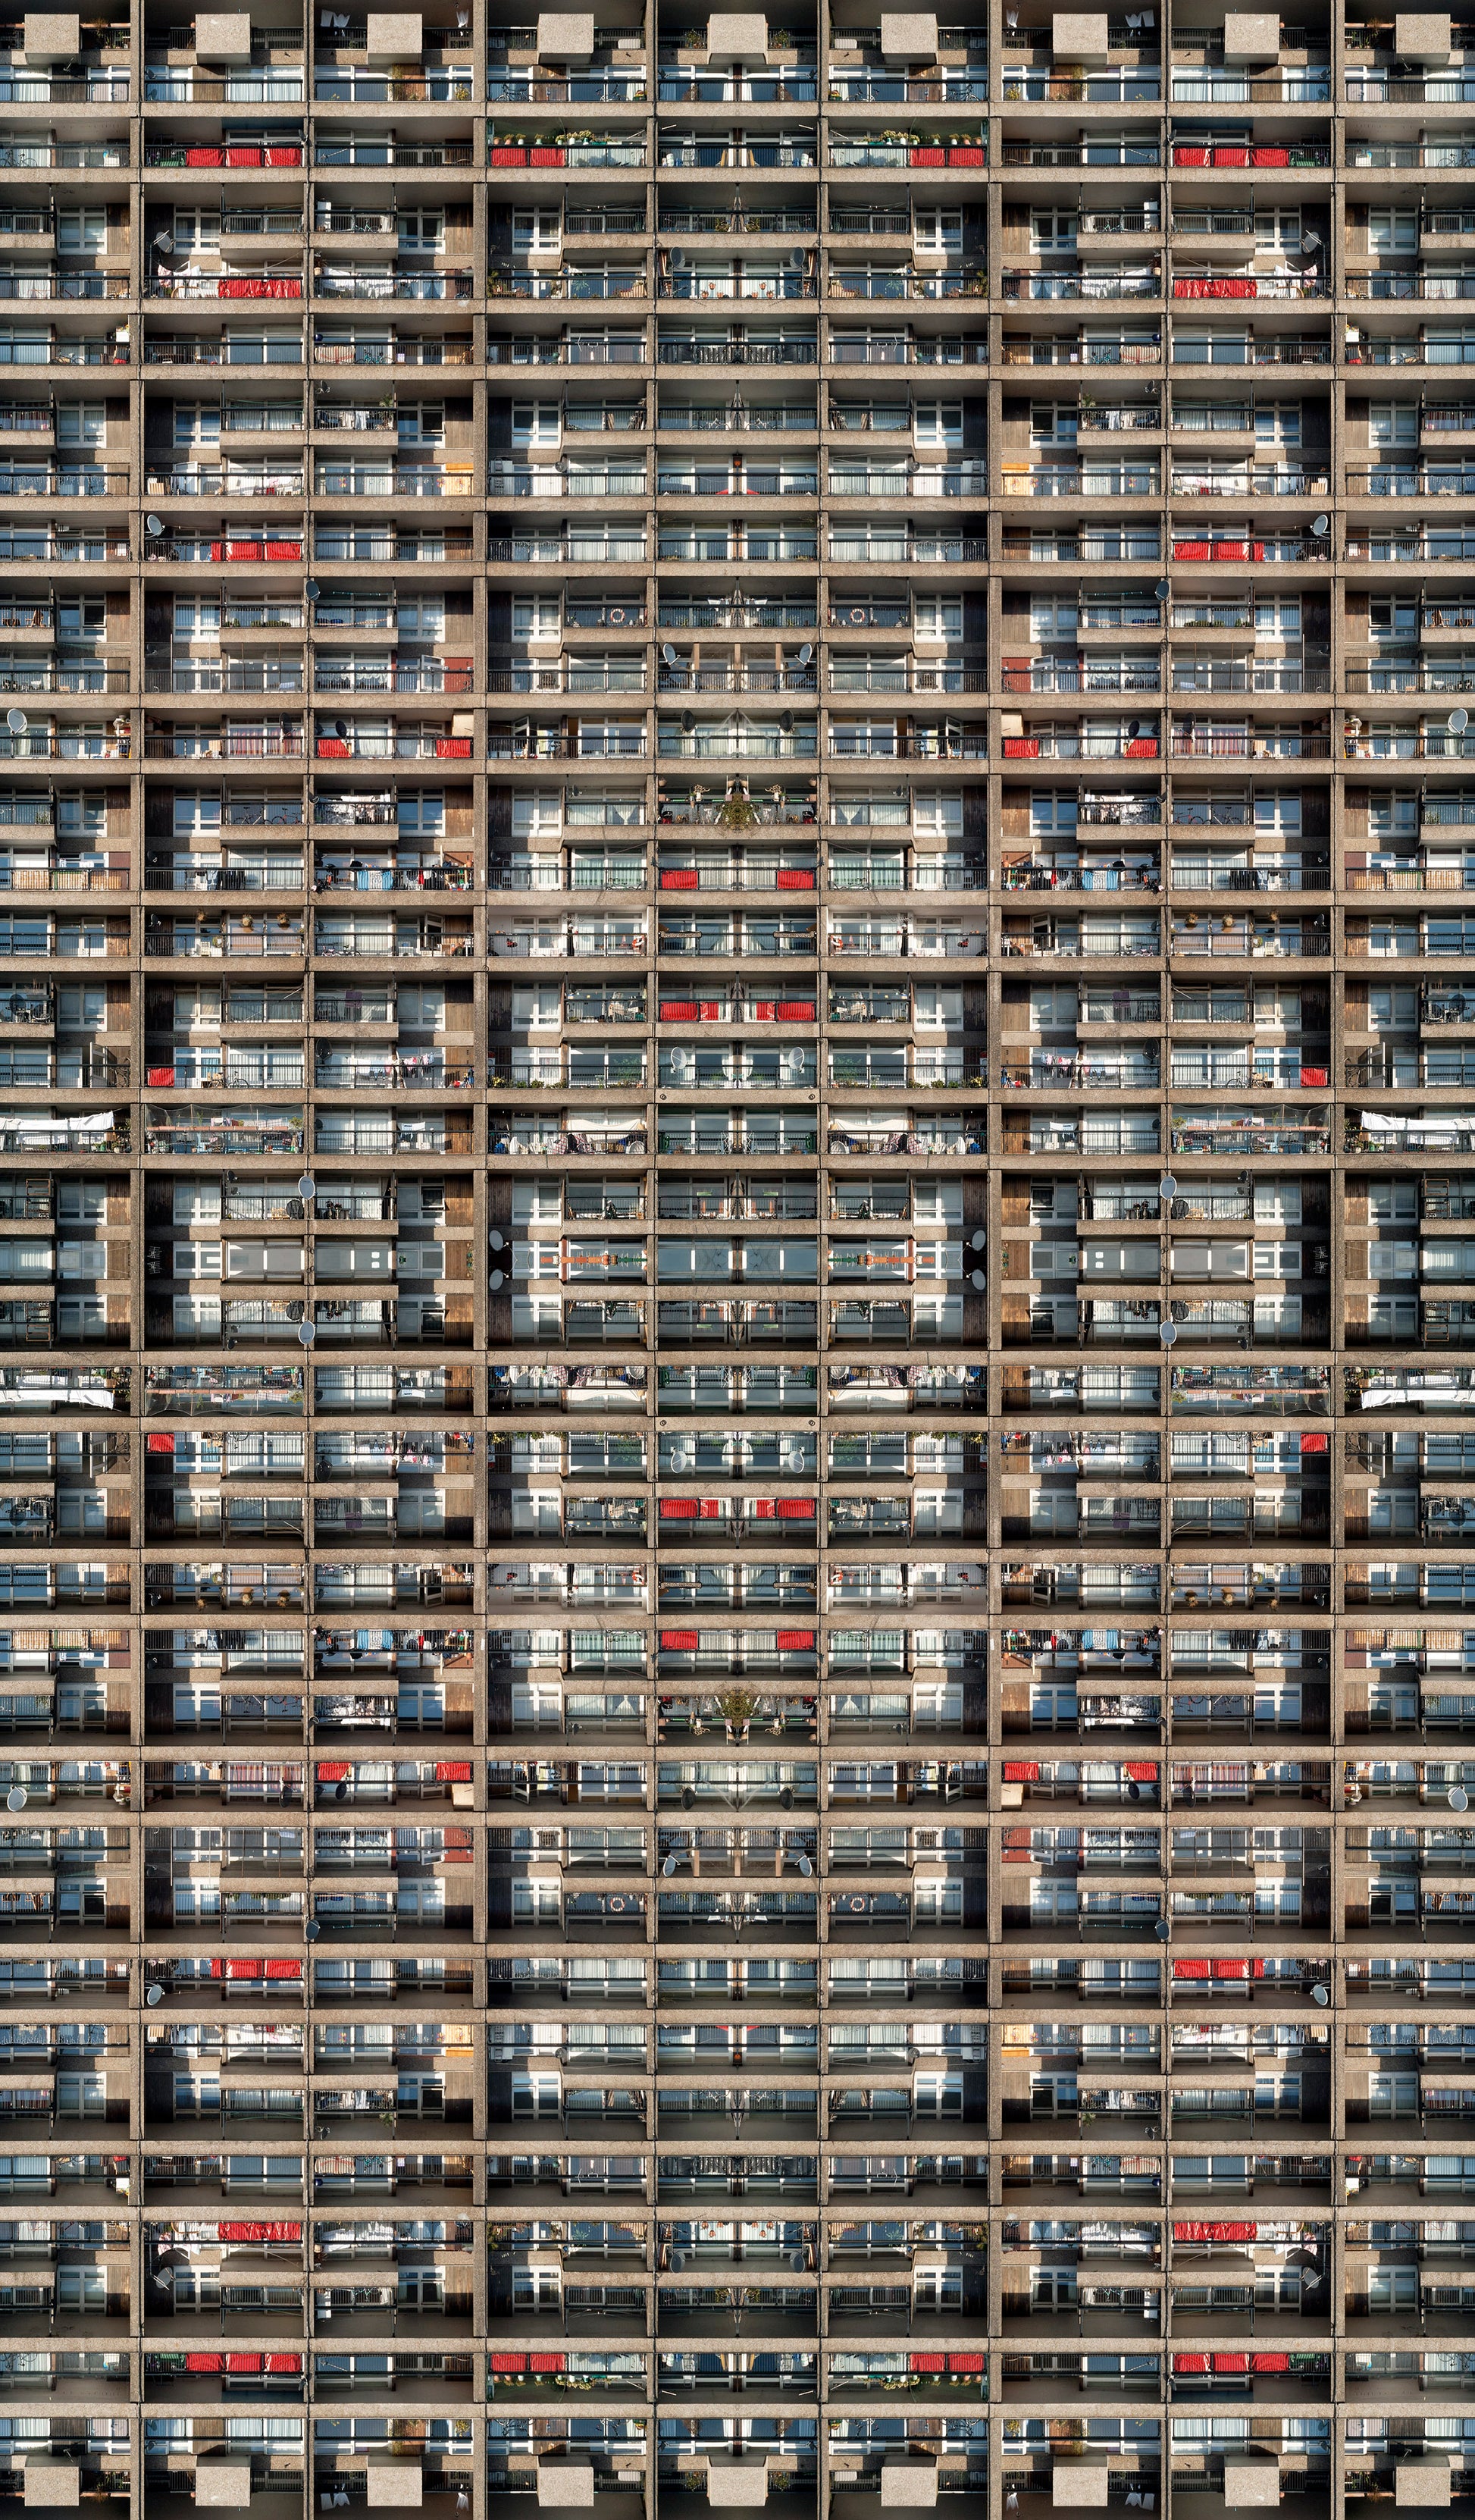 Daniel-Sambraus-Trellick-Tower-Limited-Edition-Digital-Photography-TAP-Galleries- Essex gallery 